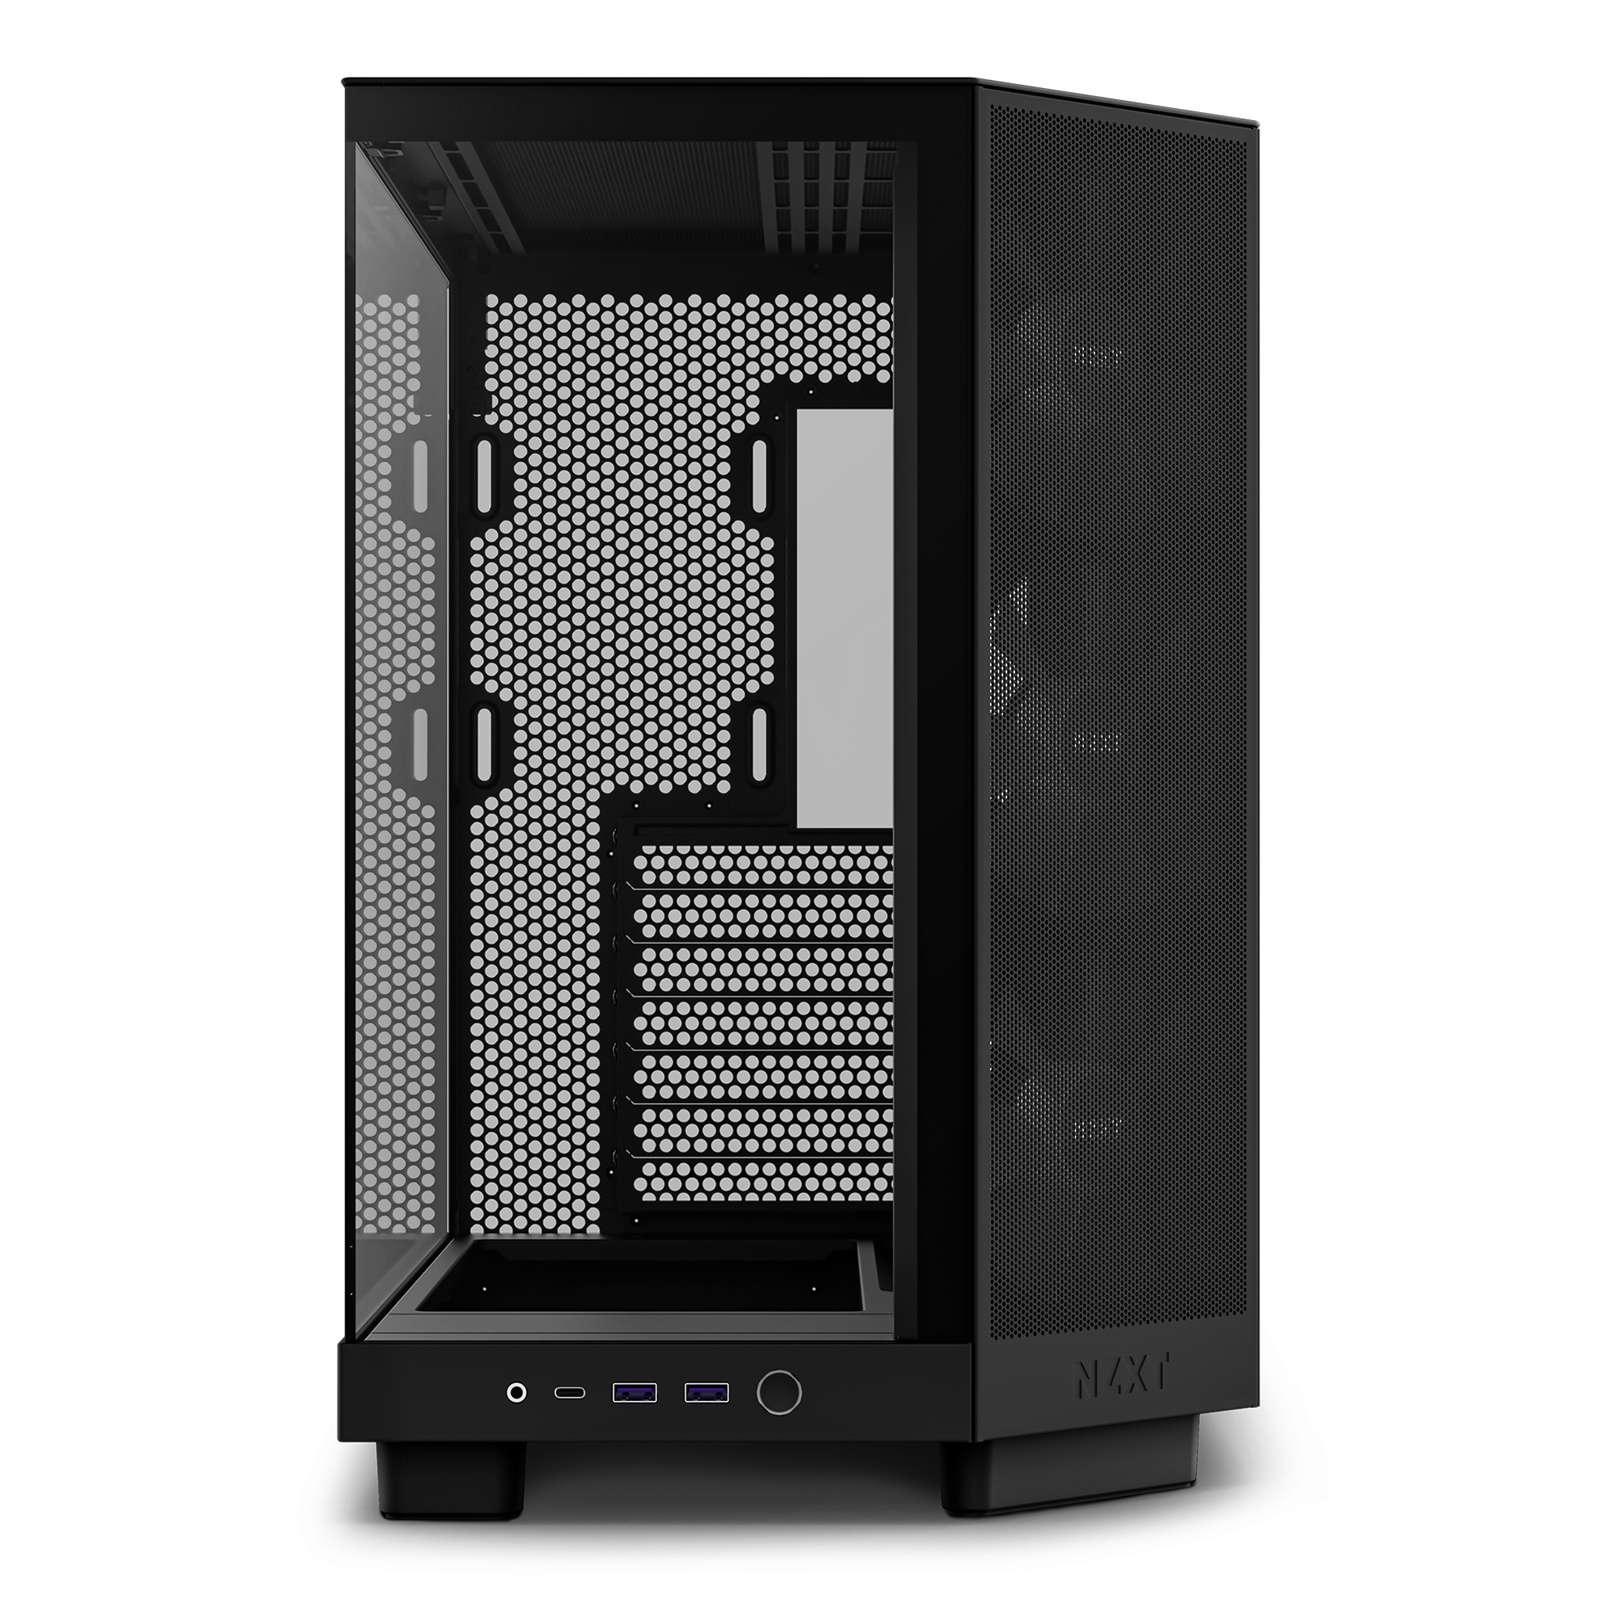 NZXT Announces the H6 Flow, A Compact Dual Chamber Mid-Tower ATX case - The  Gaming Stuff